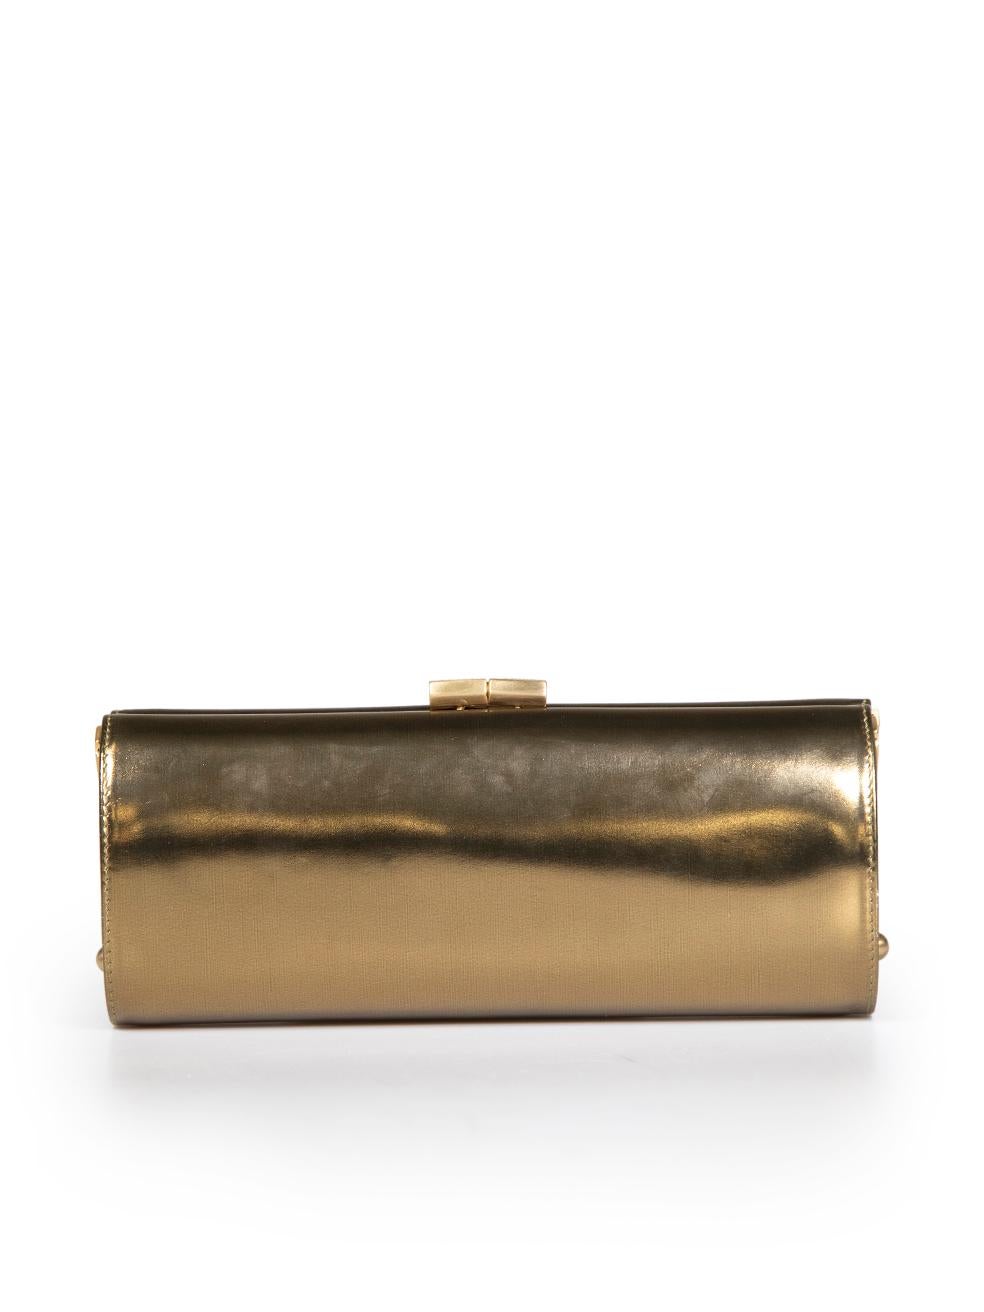 Jimmy Choo Gold Patent Leather Clasp Clutch In Excellent Condition For Sale In London, GB